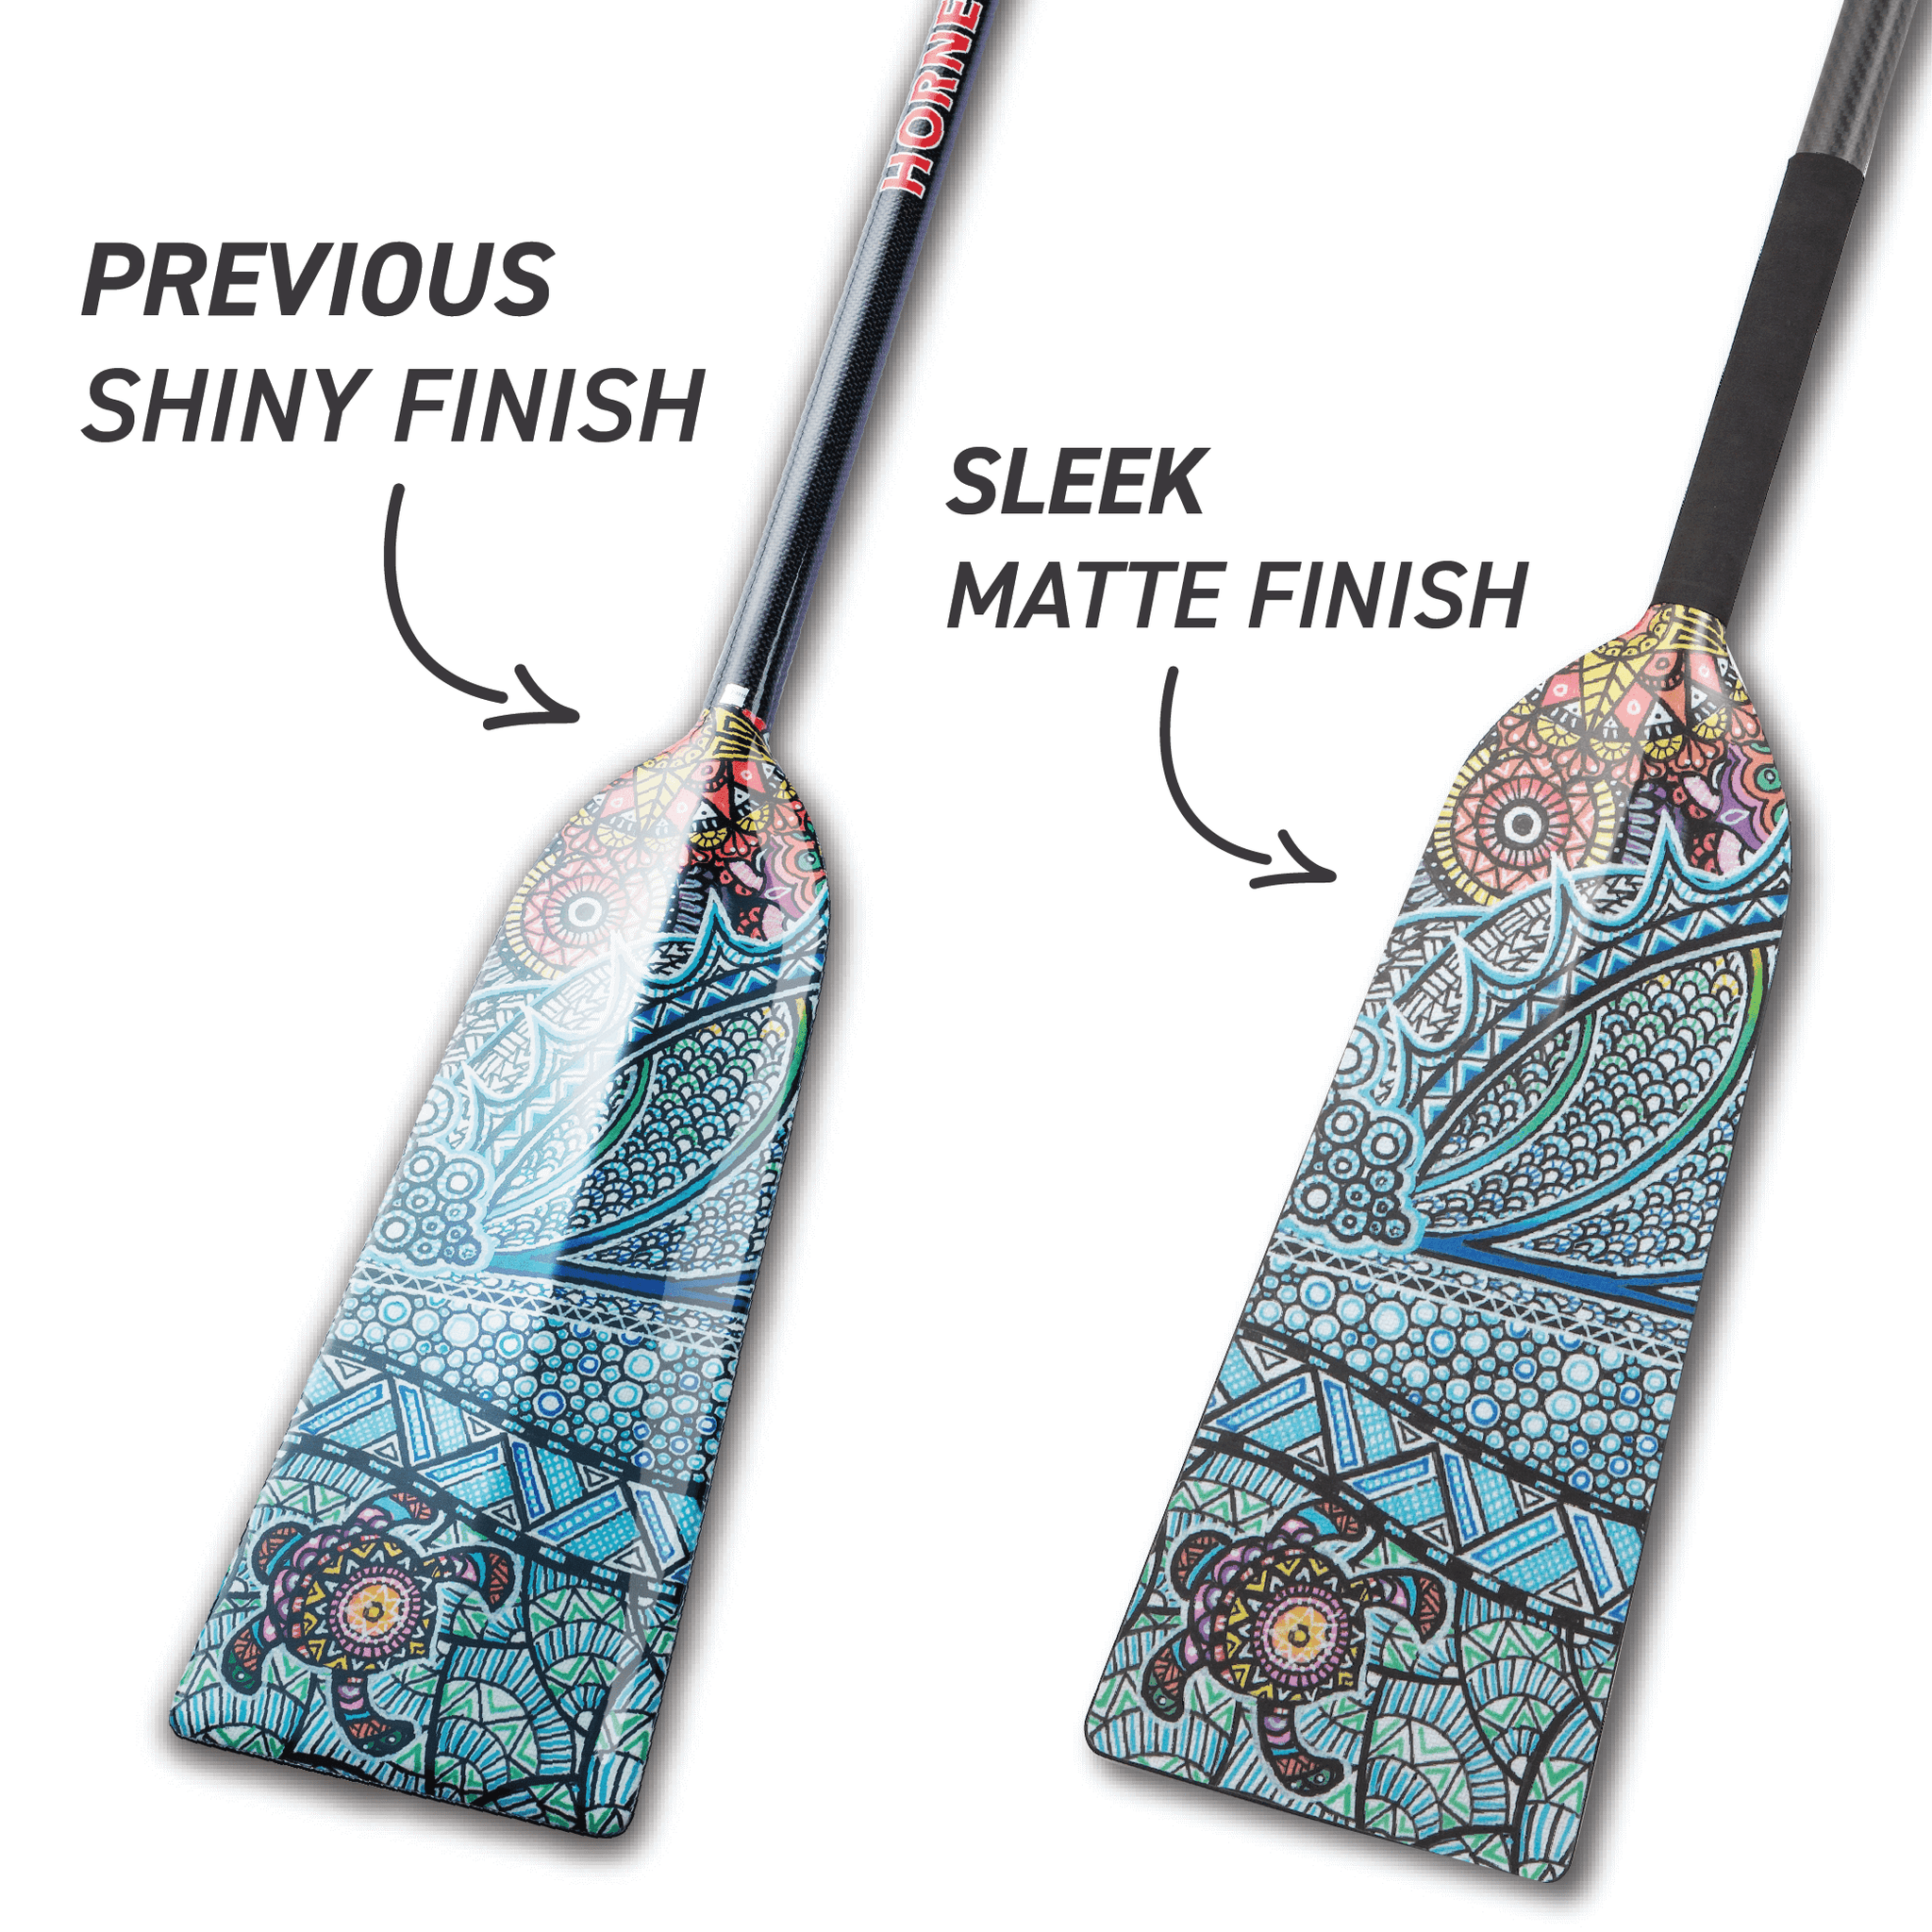 CLEARANCE- Factory Seconds: Dragon Heart X21 Sting+ Adjustable Dragon Boat Paddle